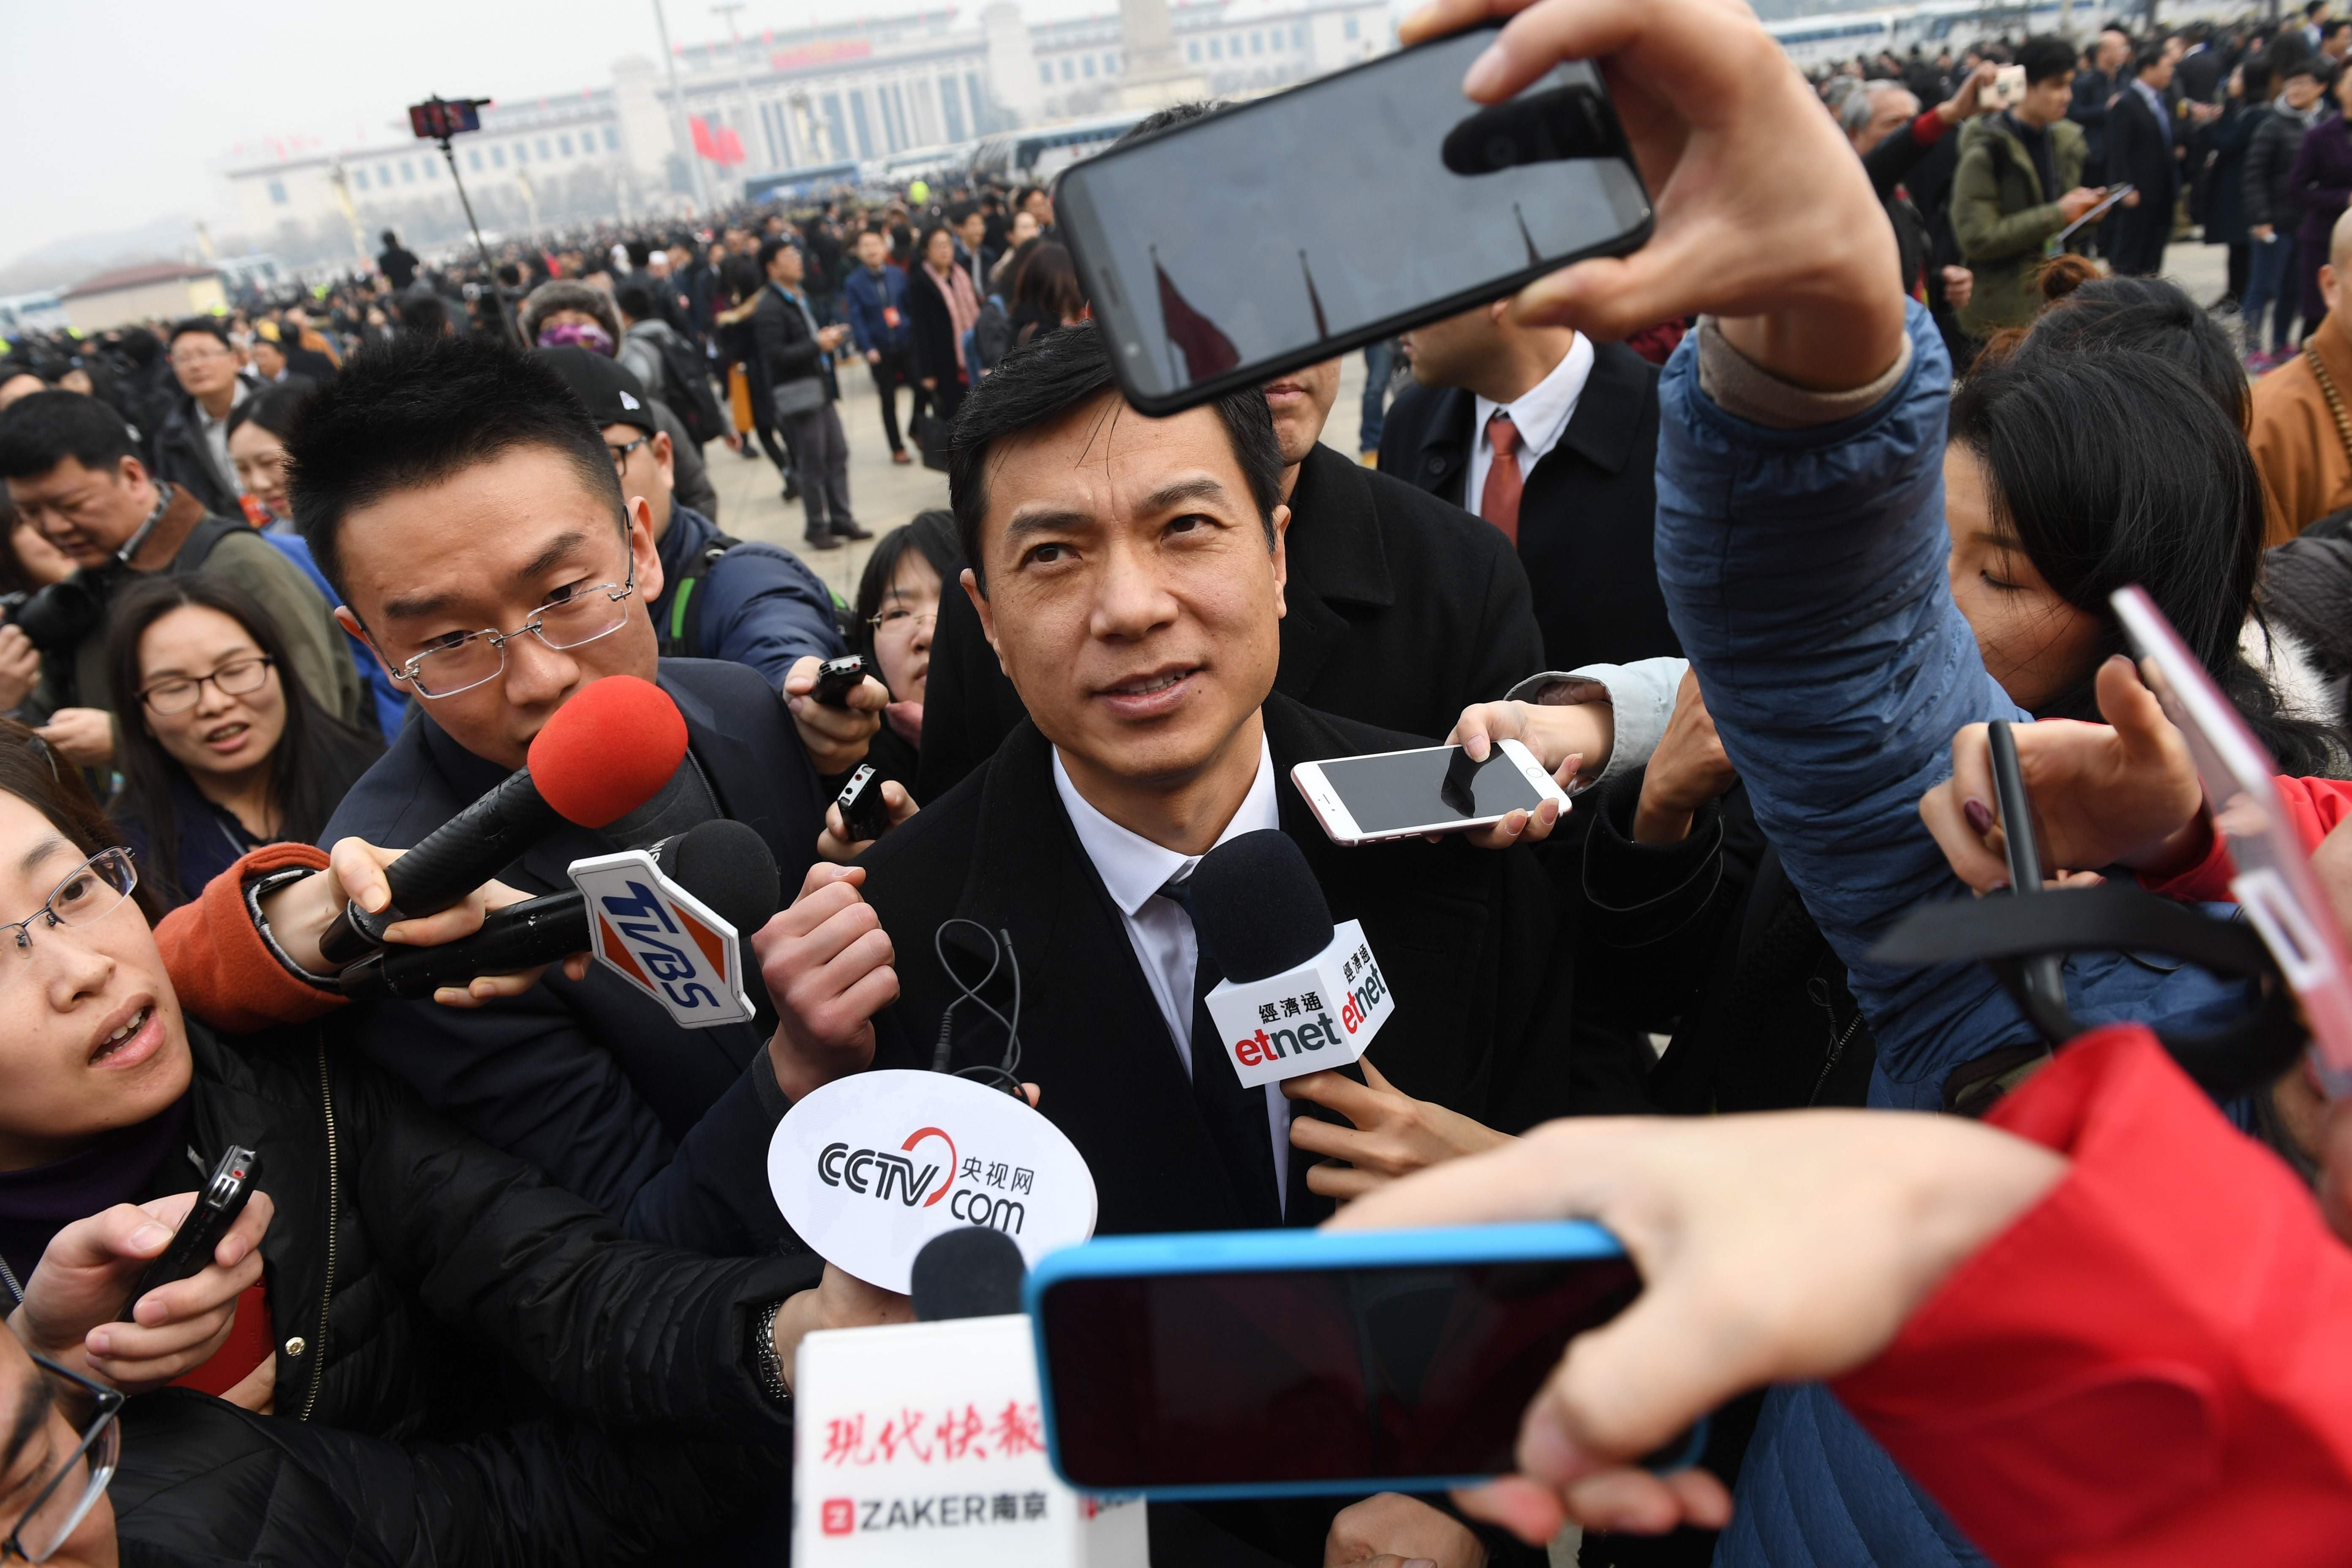 High taxes are slowing China’s quest to attract more international talent to power its artificial intelligence ambitions, says Baidu CEO Robin Li Yanhong at the annual parliamentary sessions in Beijing.